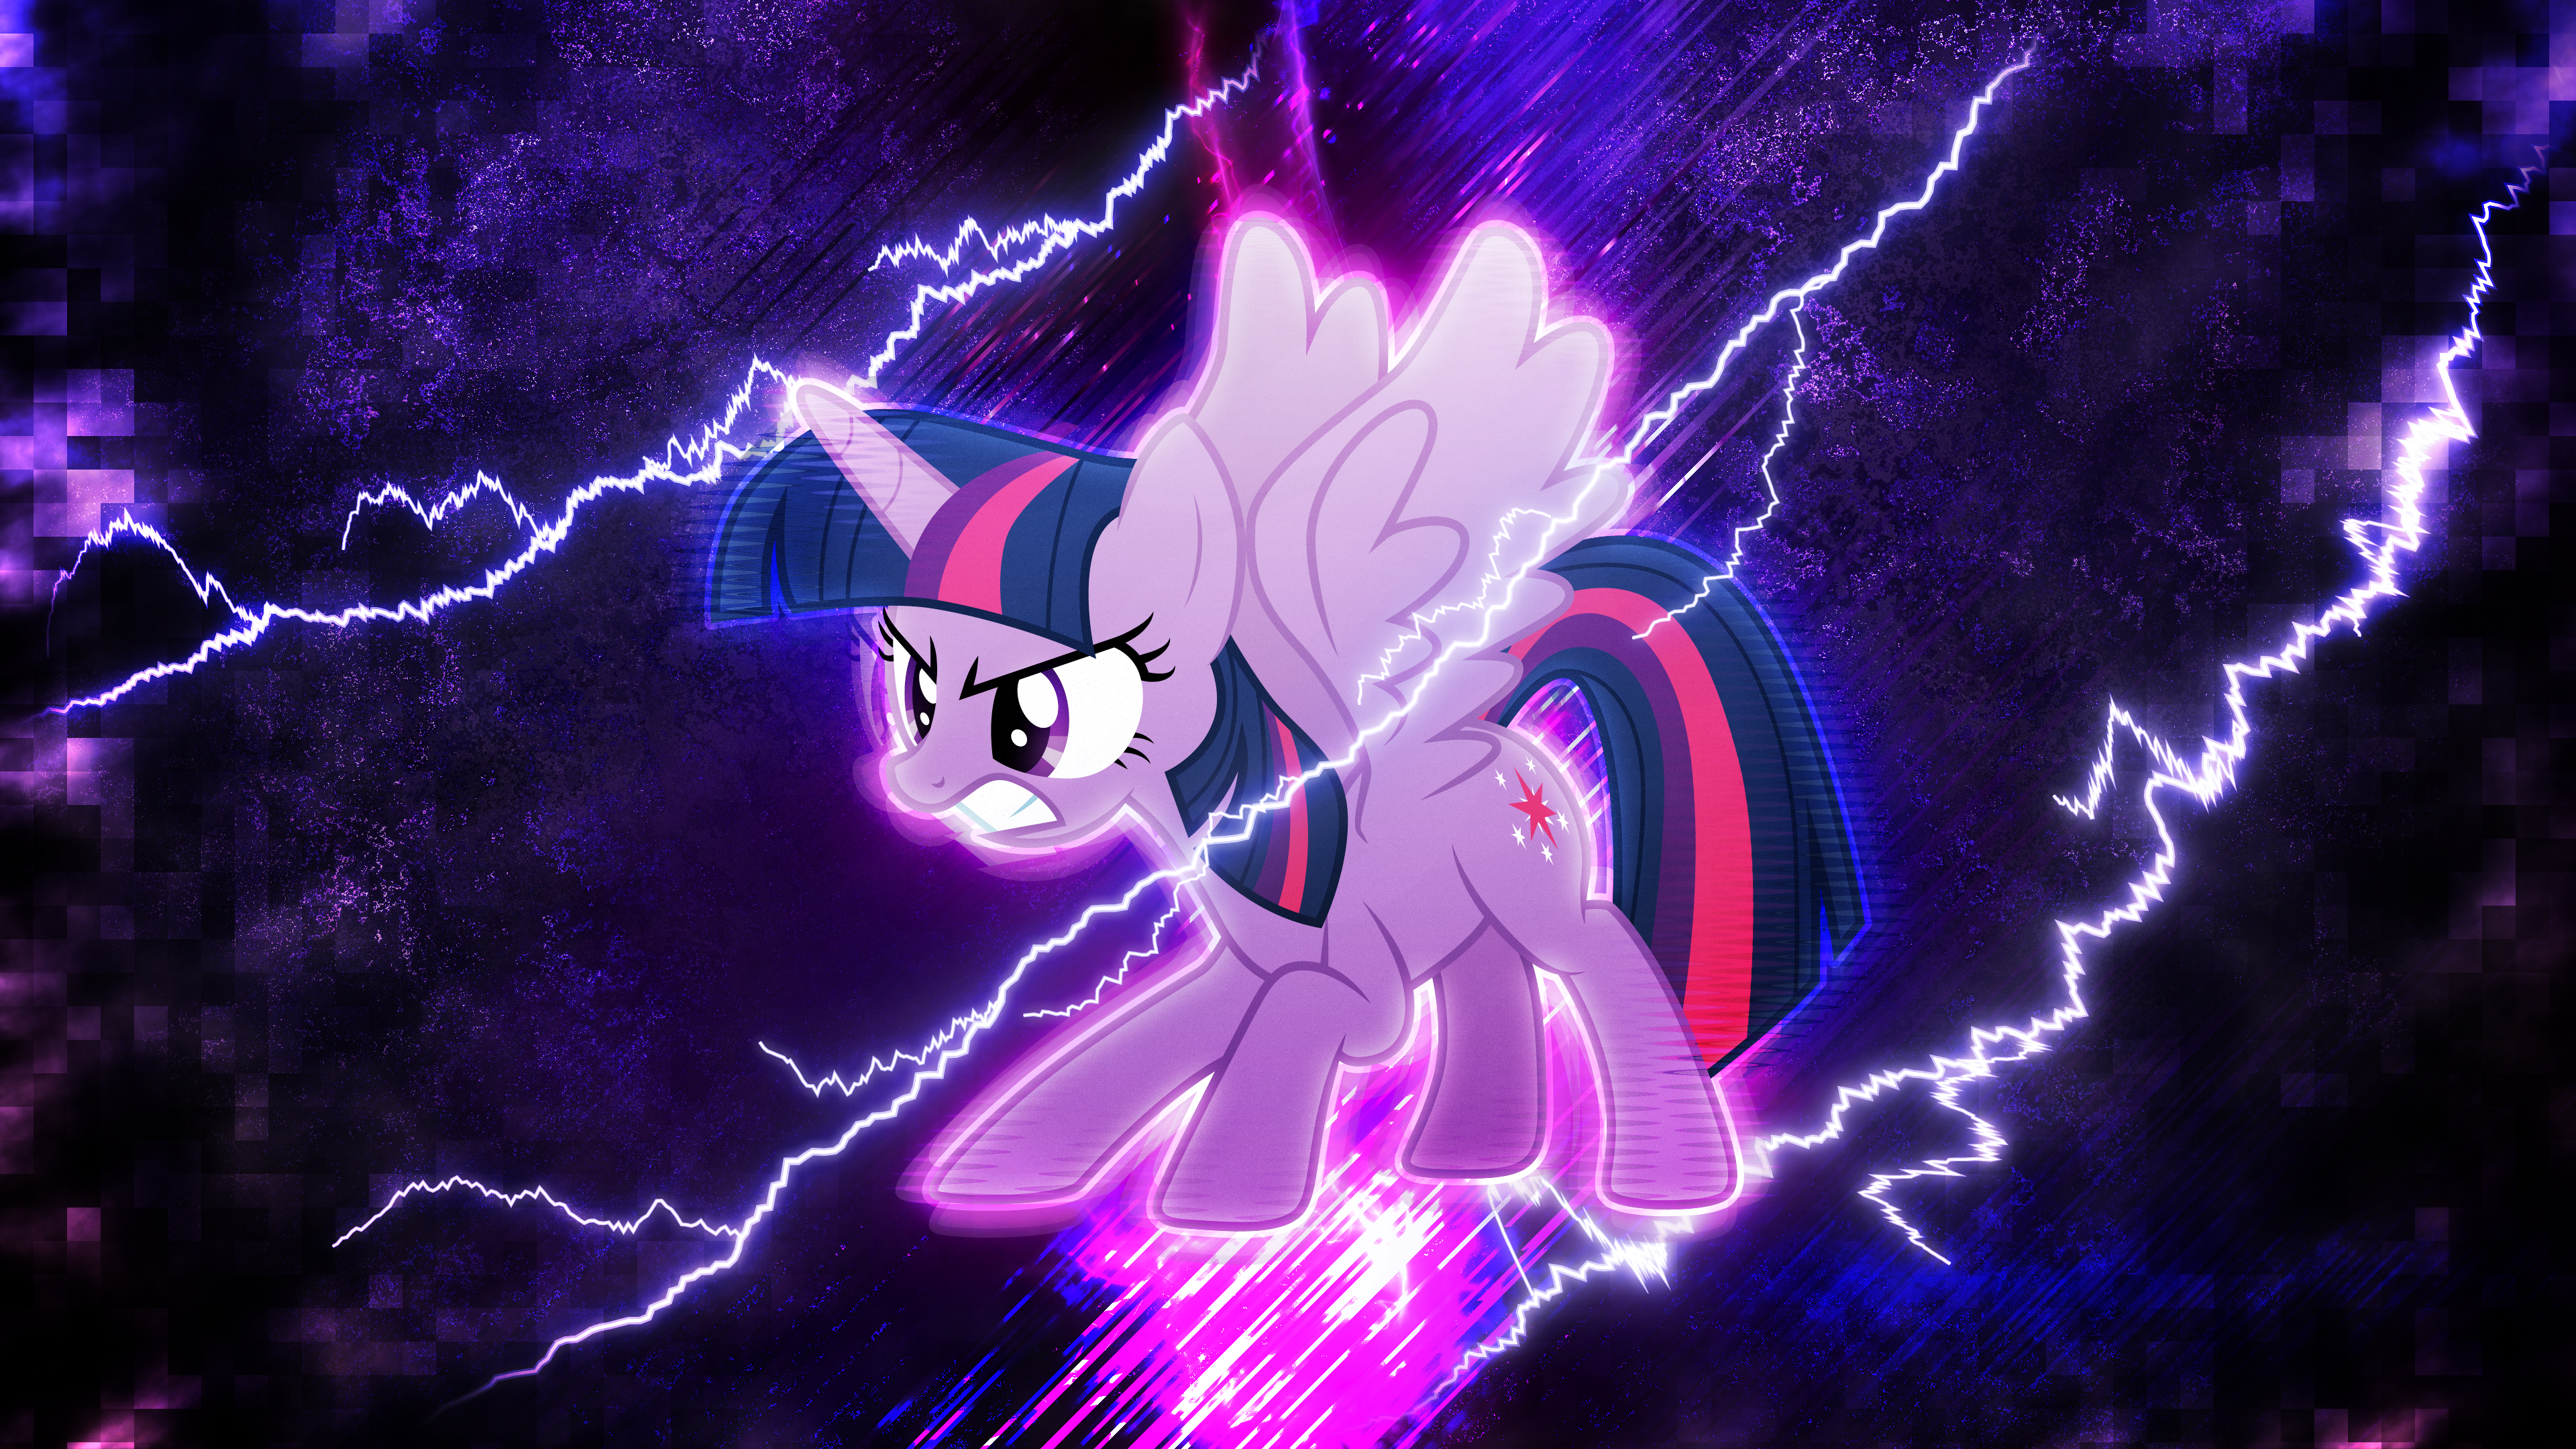 Magic Strike by CloudyGlow and Game-BeatX14